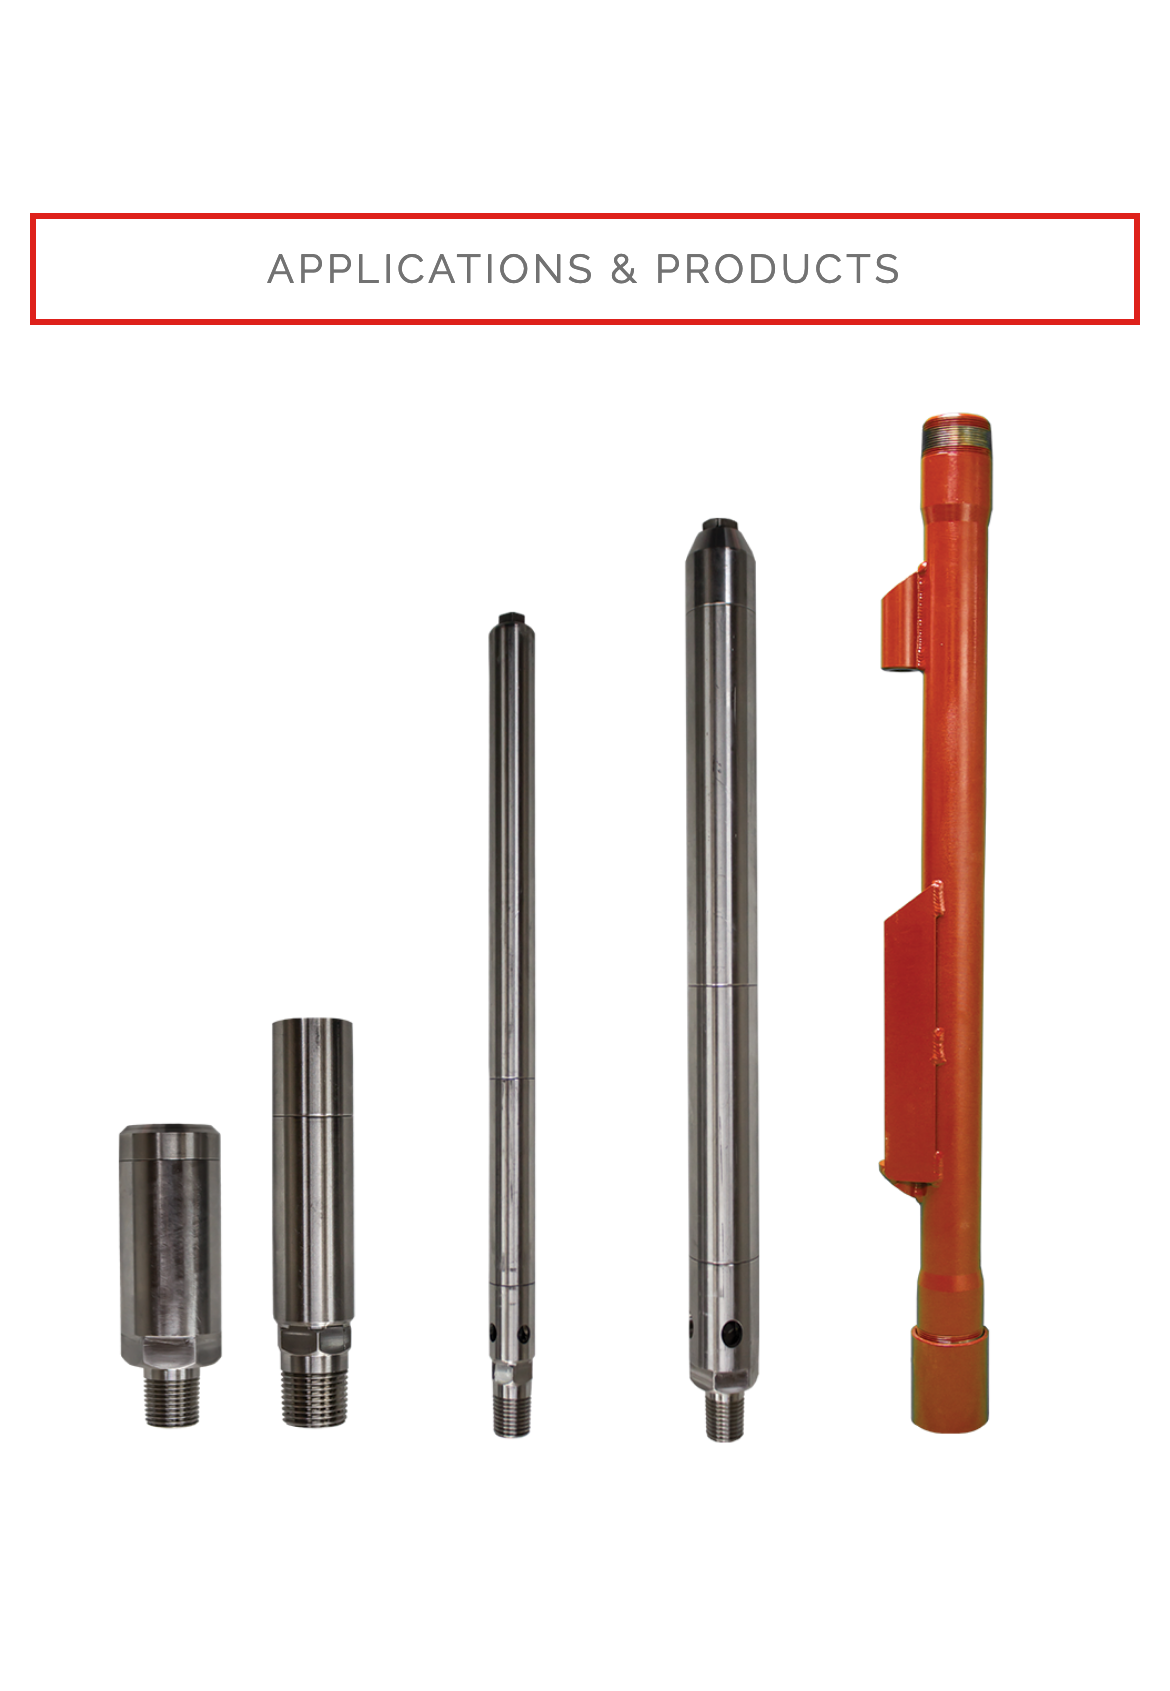 Applications & Products